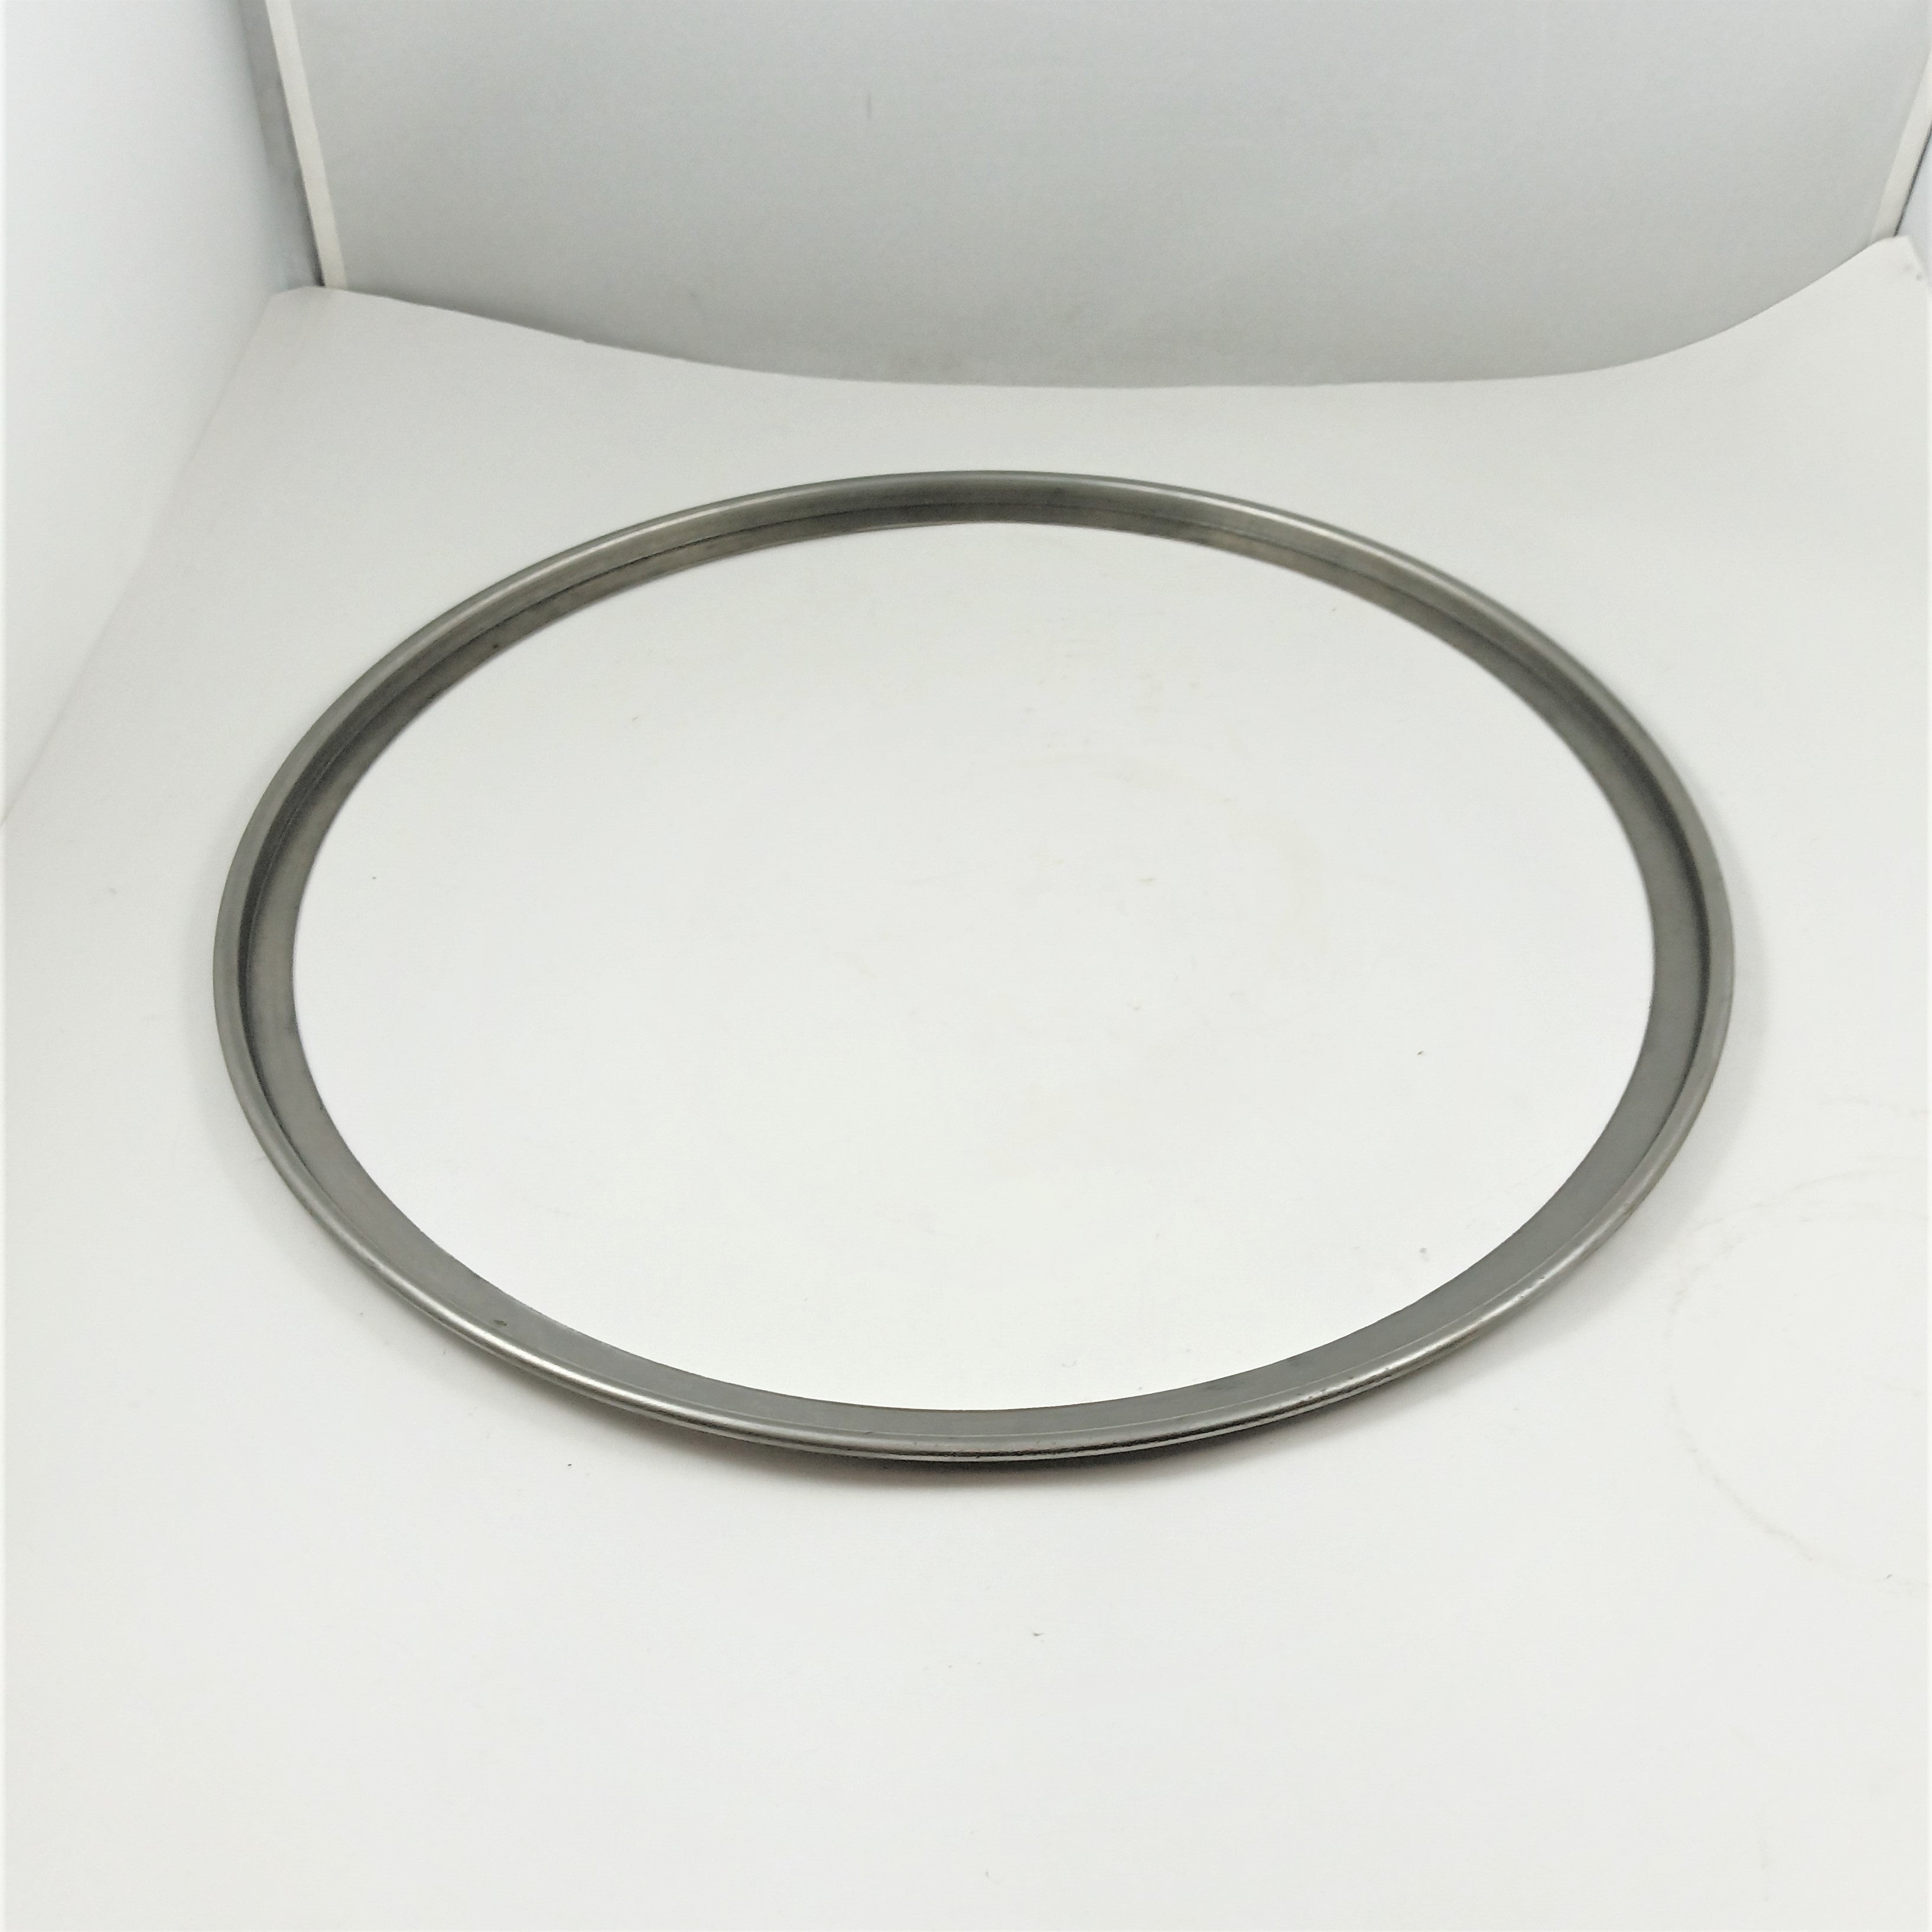 Steel ring unfinished 12" diameter